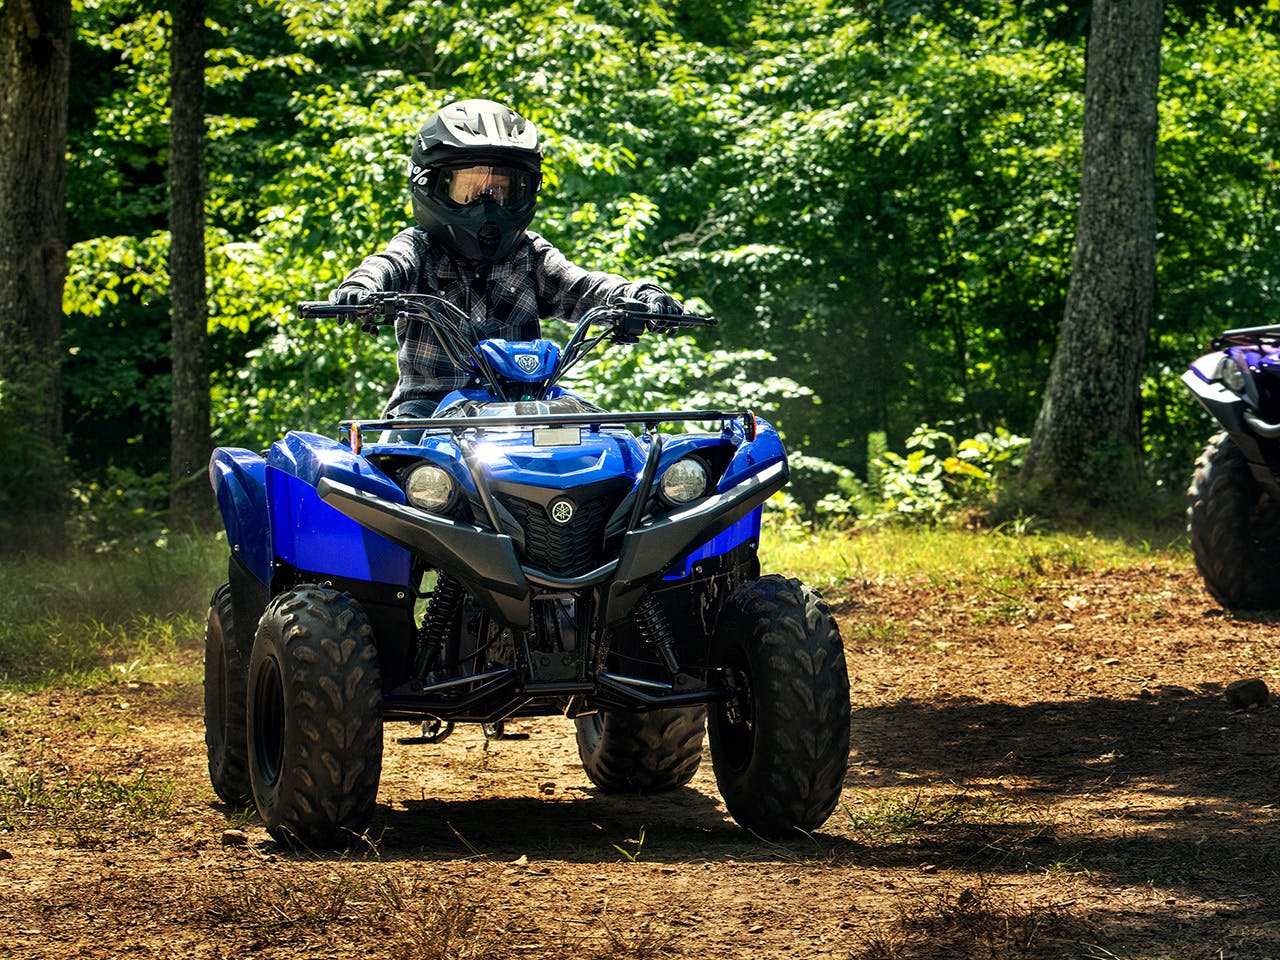 Yamaha Grizzly 90 in Steel Blue colour, being ridden off-track